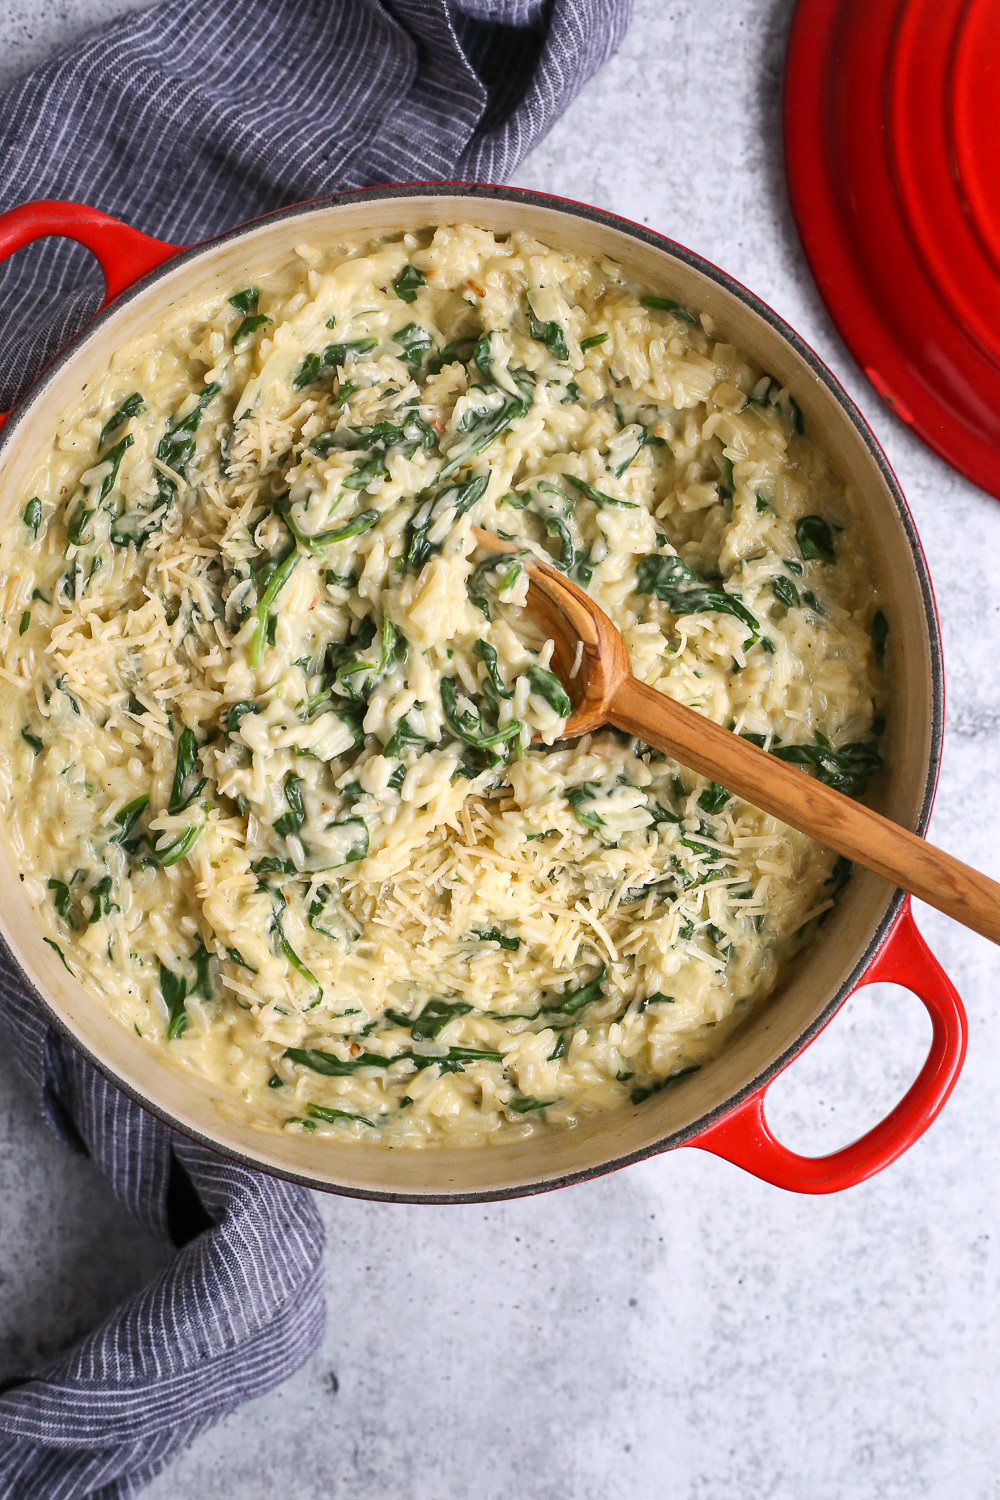 A pot full of cheesy spinach rice with a wooden serving spoon and blue striped linen on a cement kitchen countertop